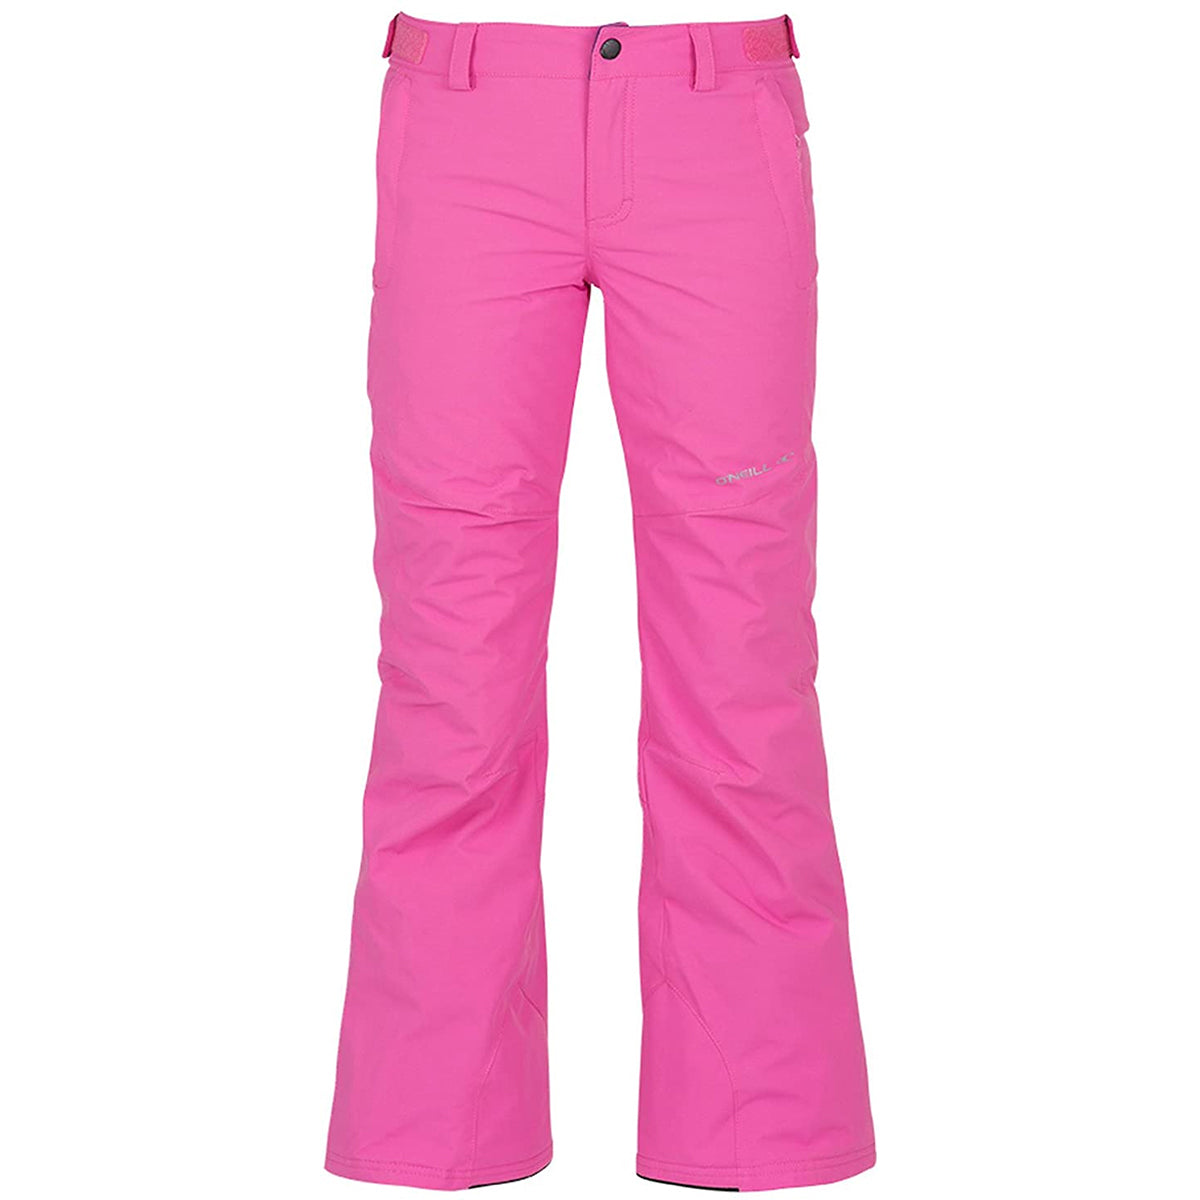 O'Neill Charm Youth Girls Snow Pants (Brand New) –